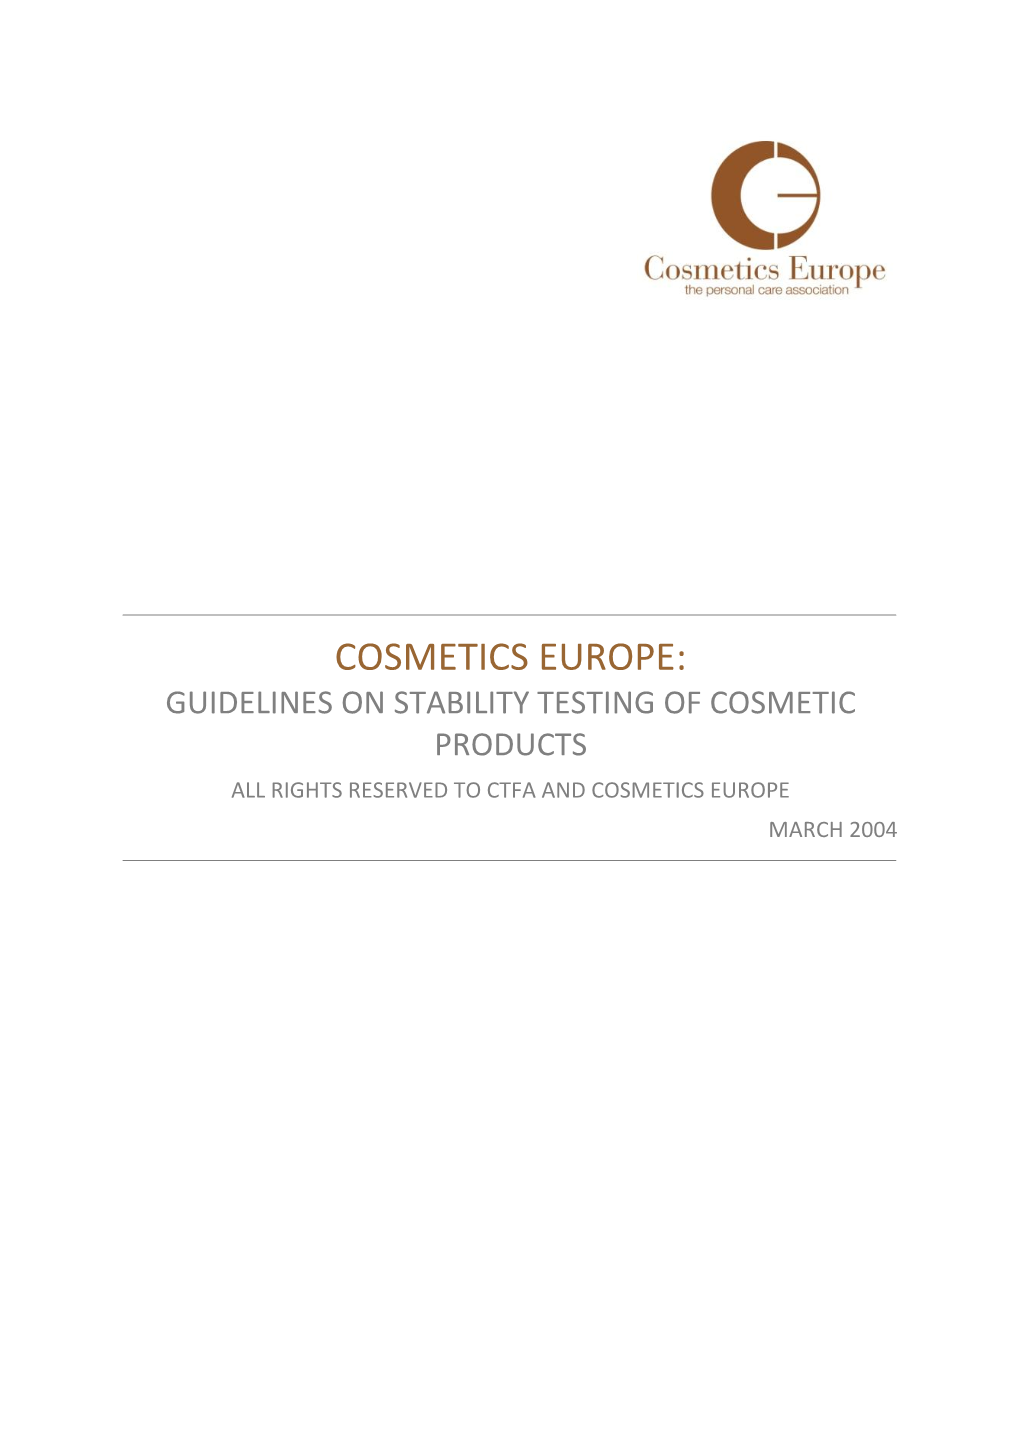 Guidelines on Stability Testing of Cosmetics